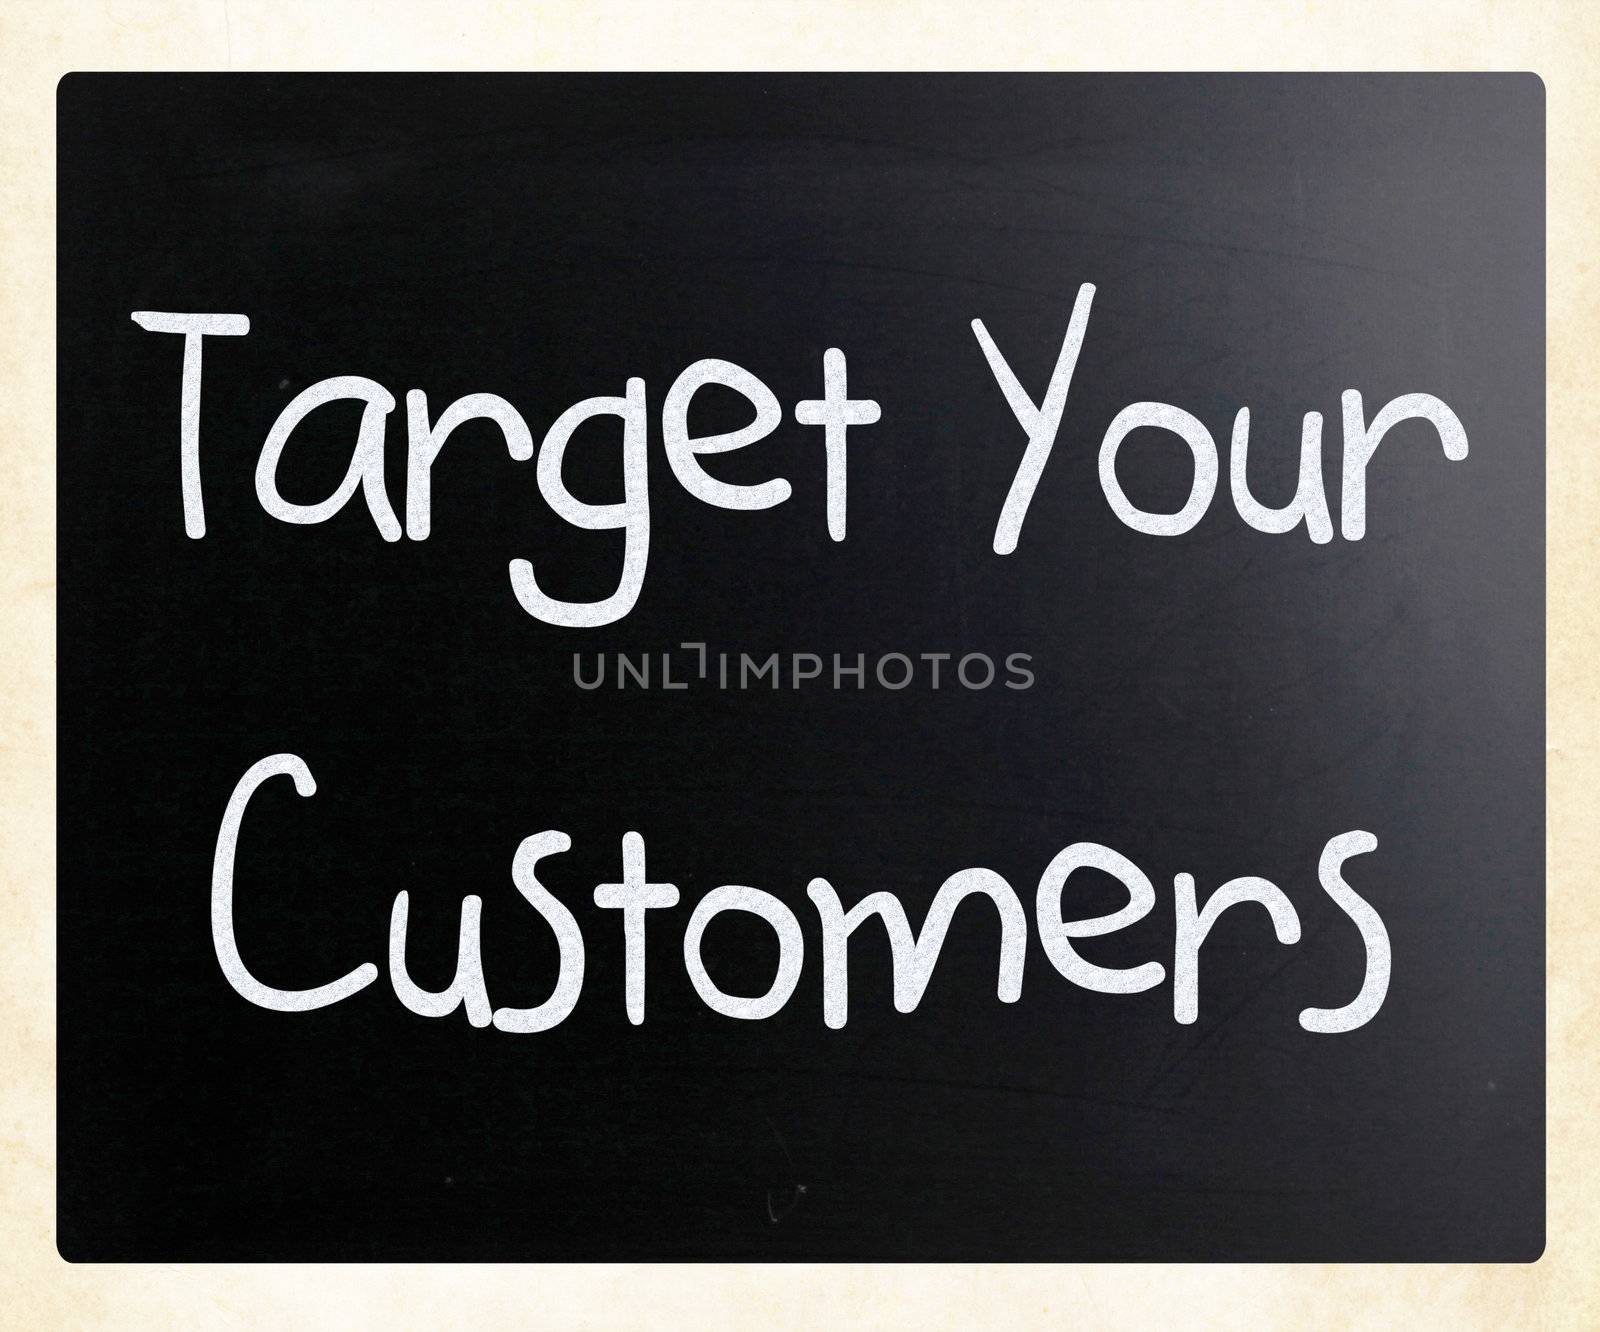 "Target your customers" handwritten with white chalk on a blackboard